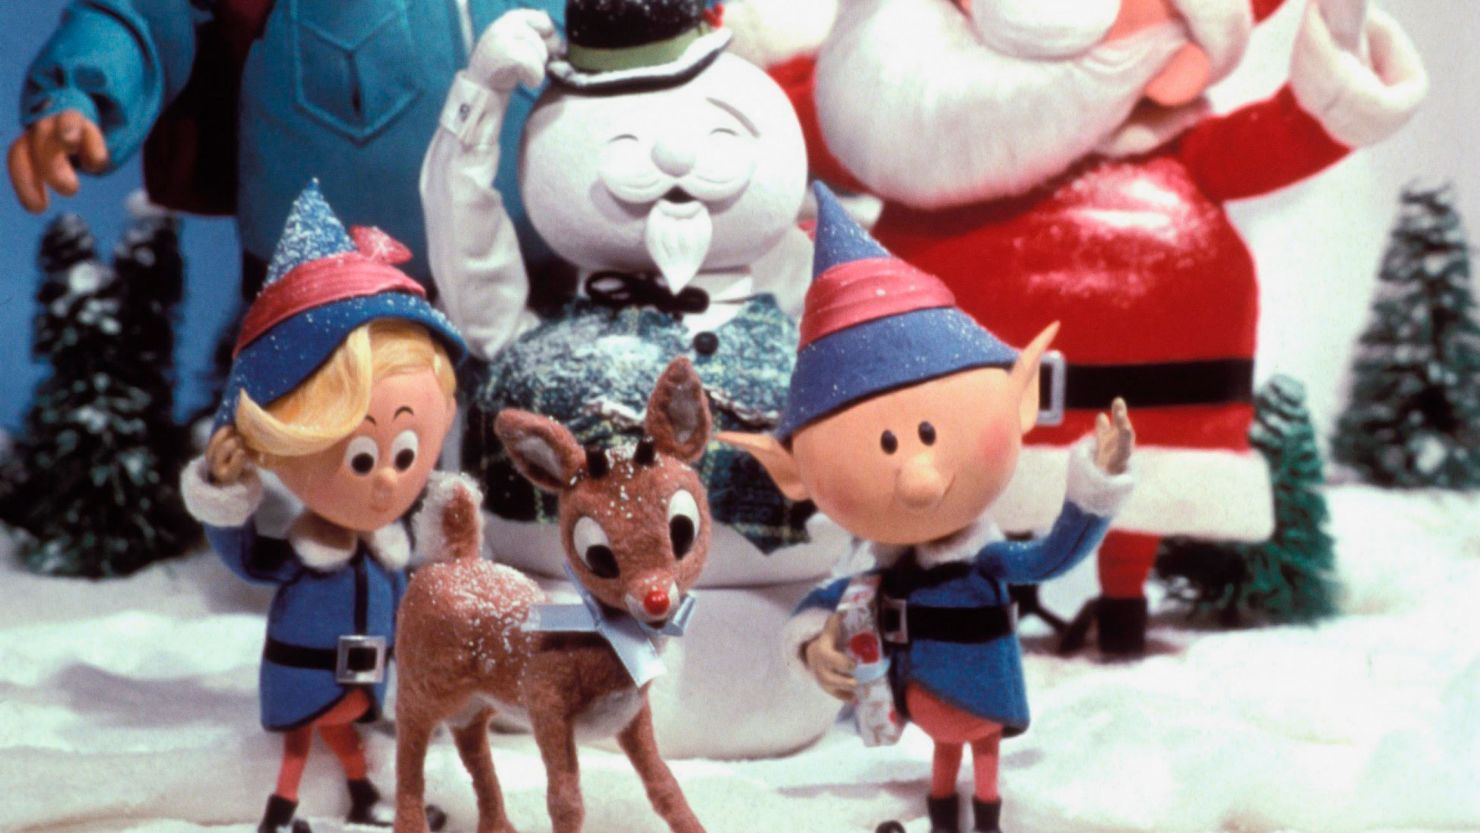 Jules Bass, the director, writer and producer who, with his partner Arthur Rankin Jr., created beloved Christmas specials like "Rudolph the Red-Nosed Reindeer," has died at 87.